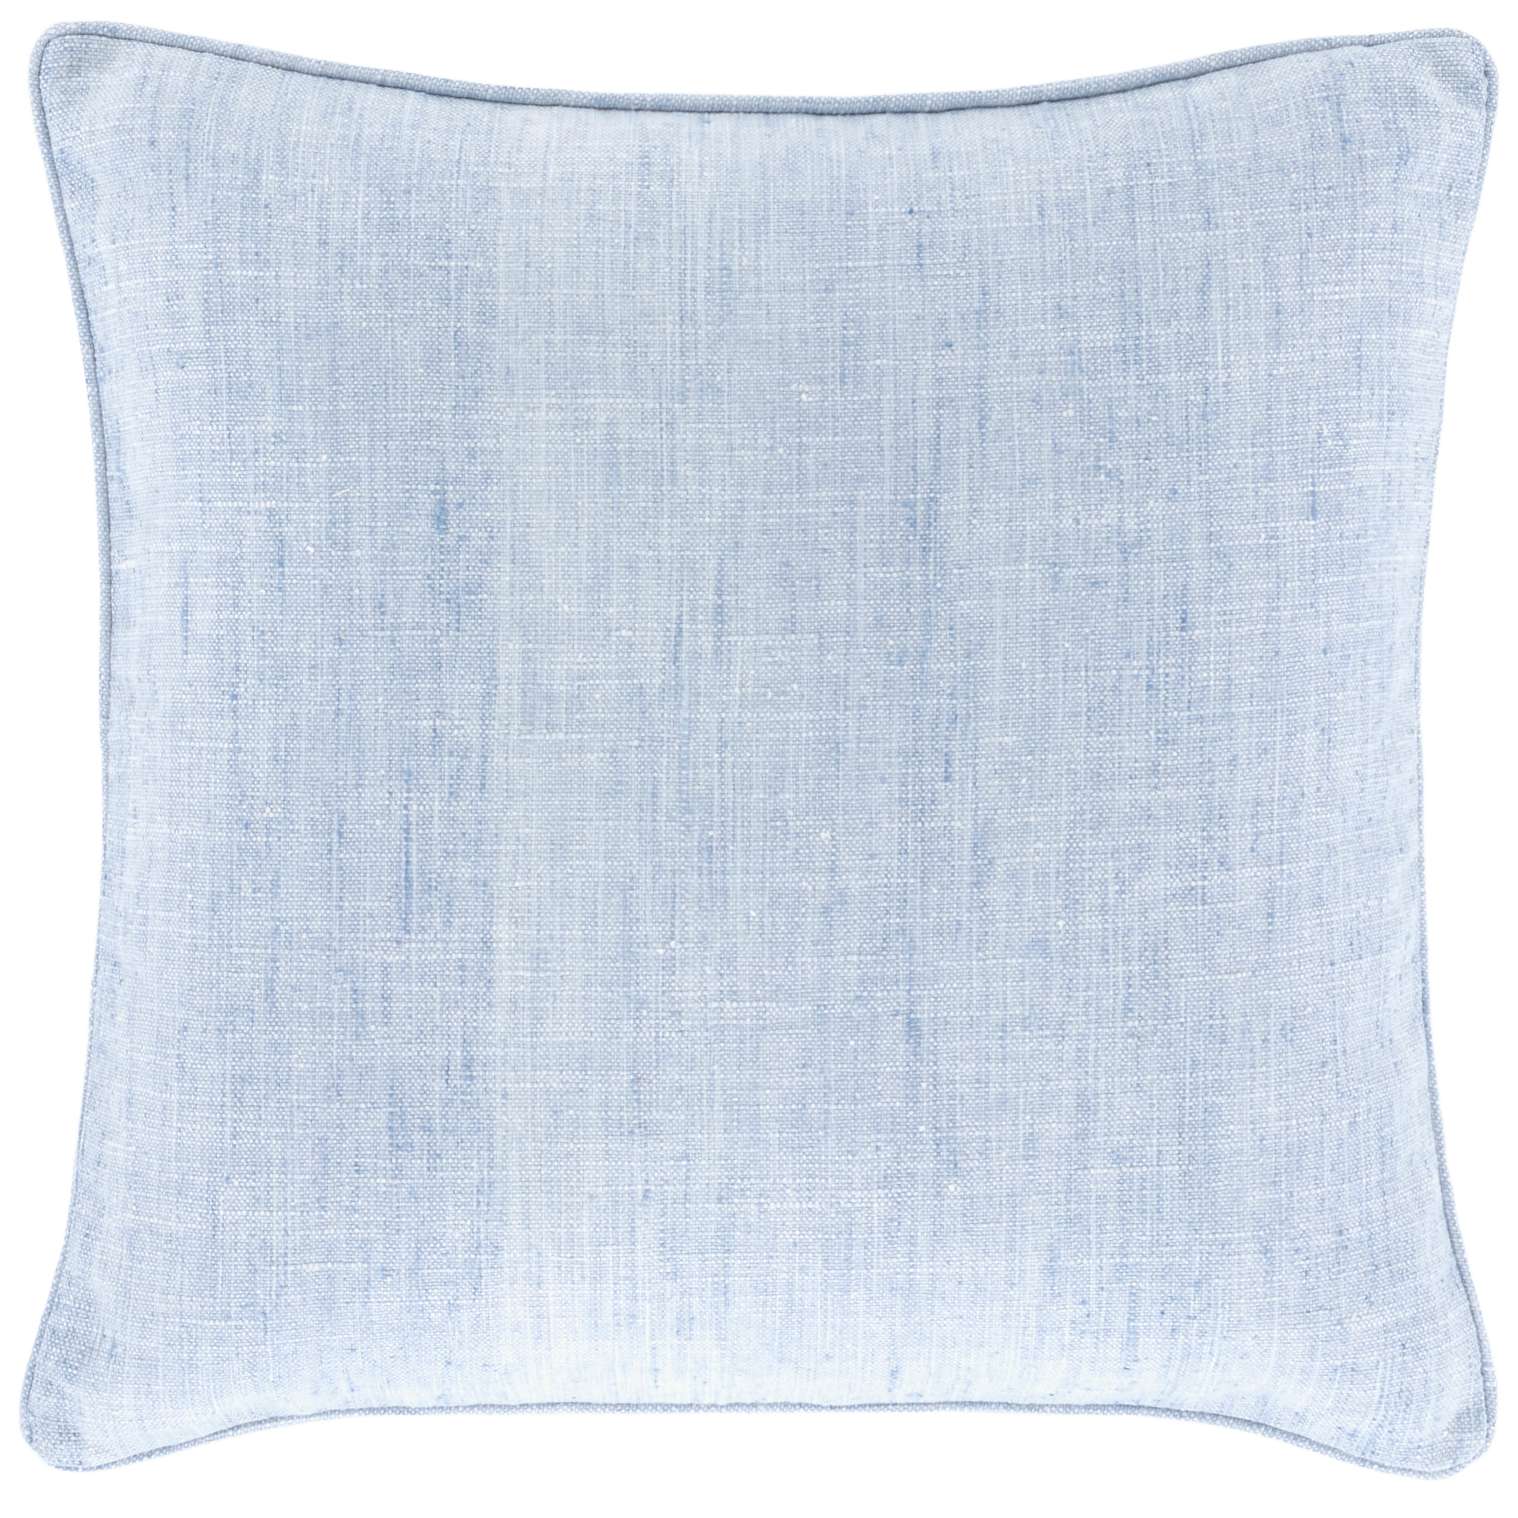 Pine Cone Hill Greylock Soft French Blue Indoor/Outdoor Decorative Pillow